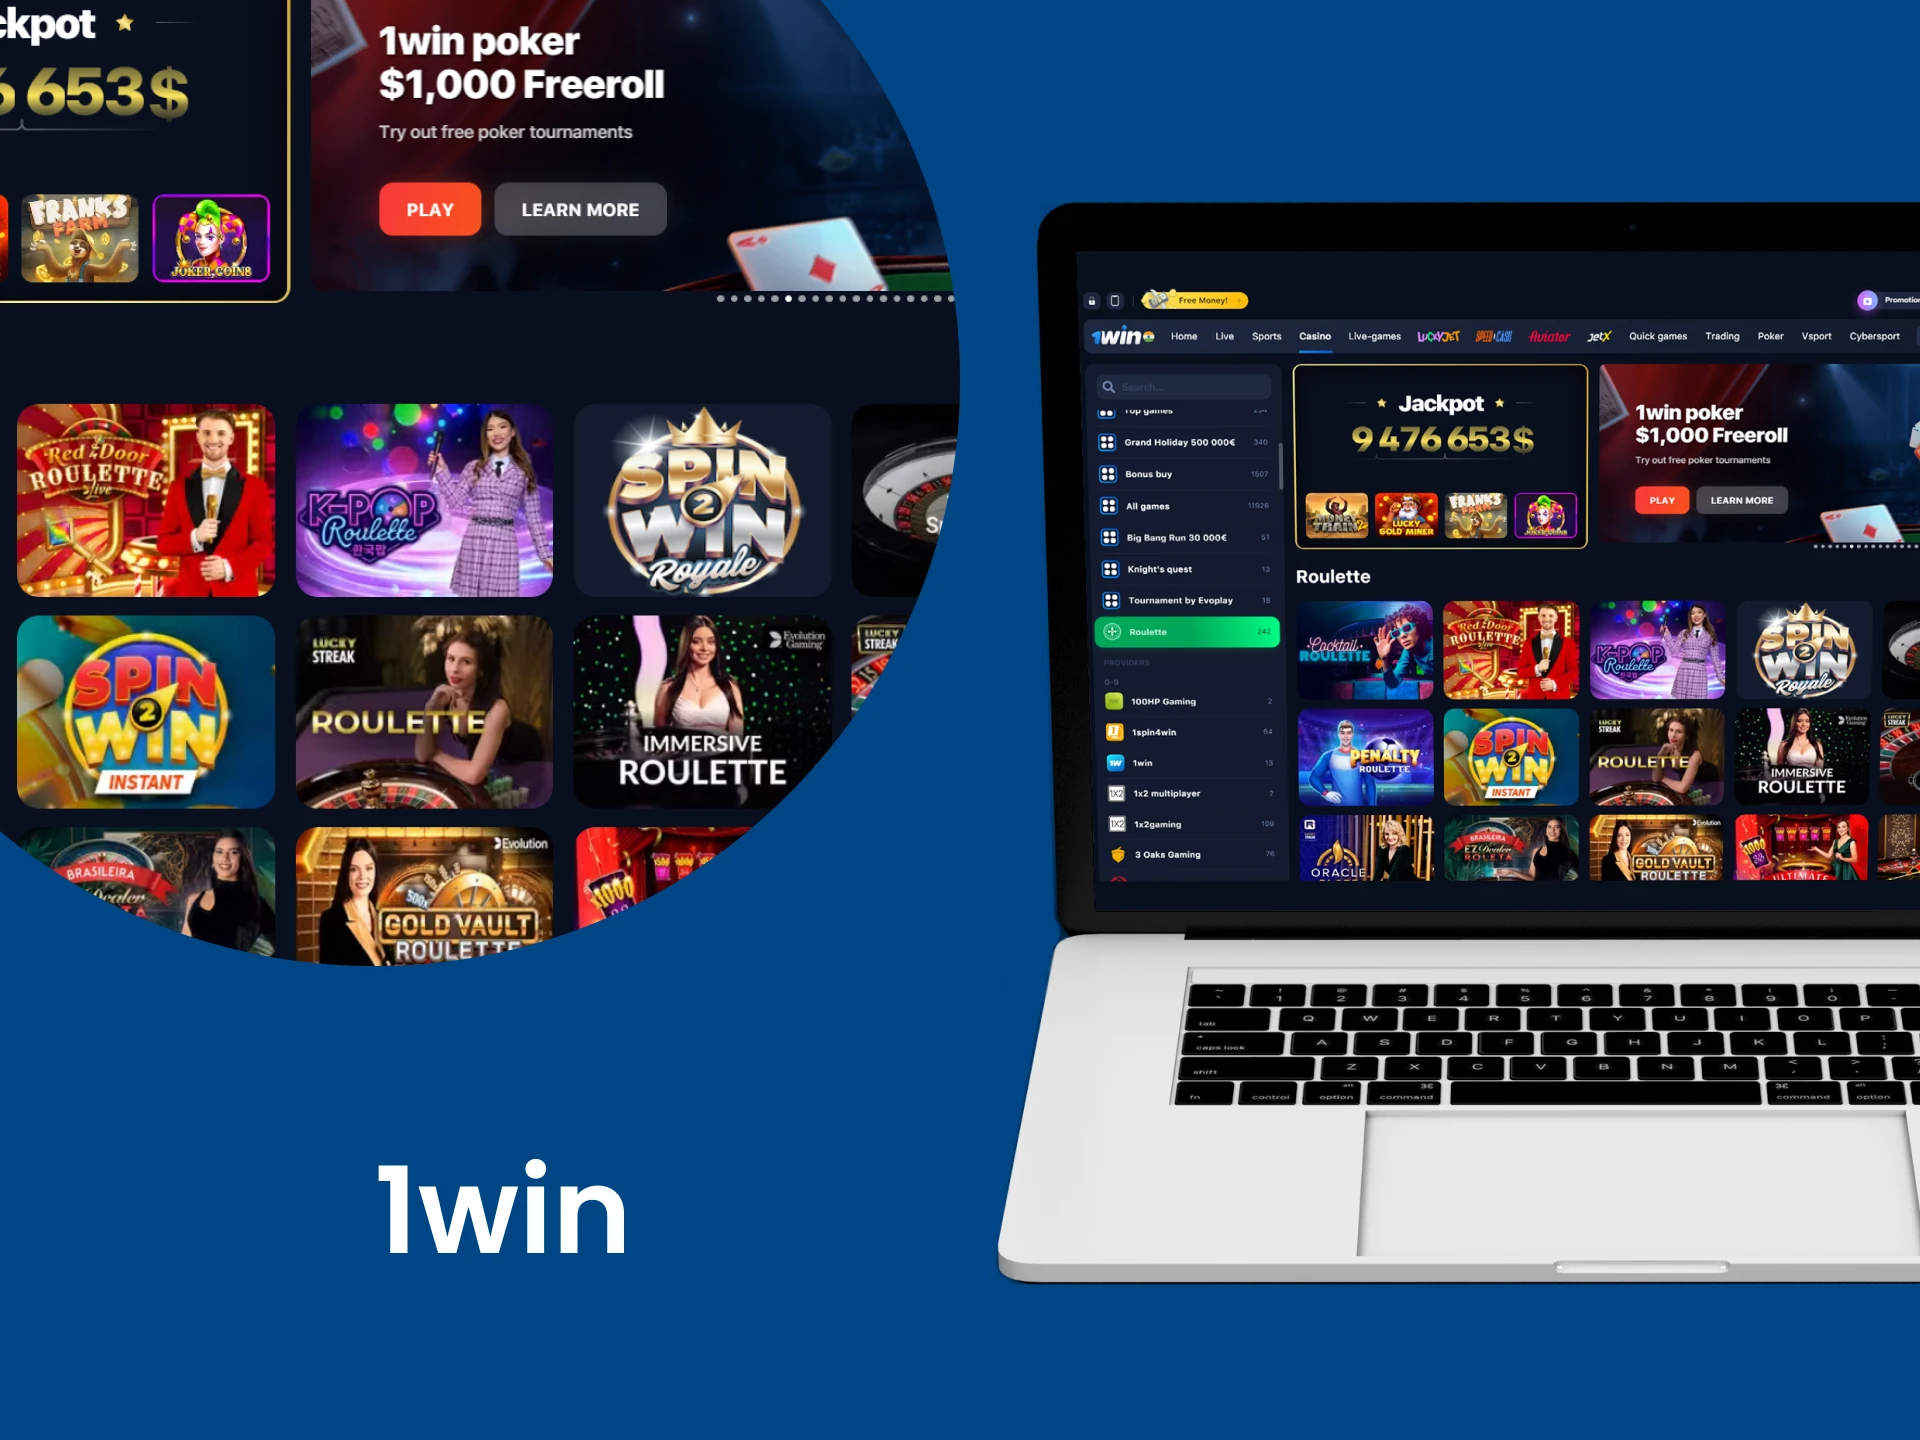 Choose a quality roulette service such as 1win.